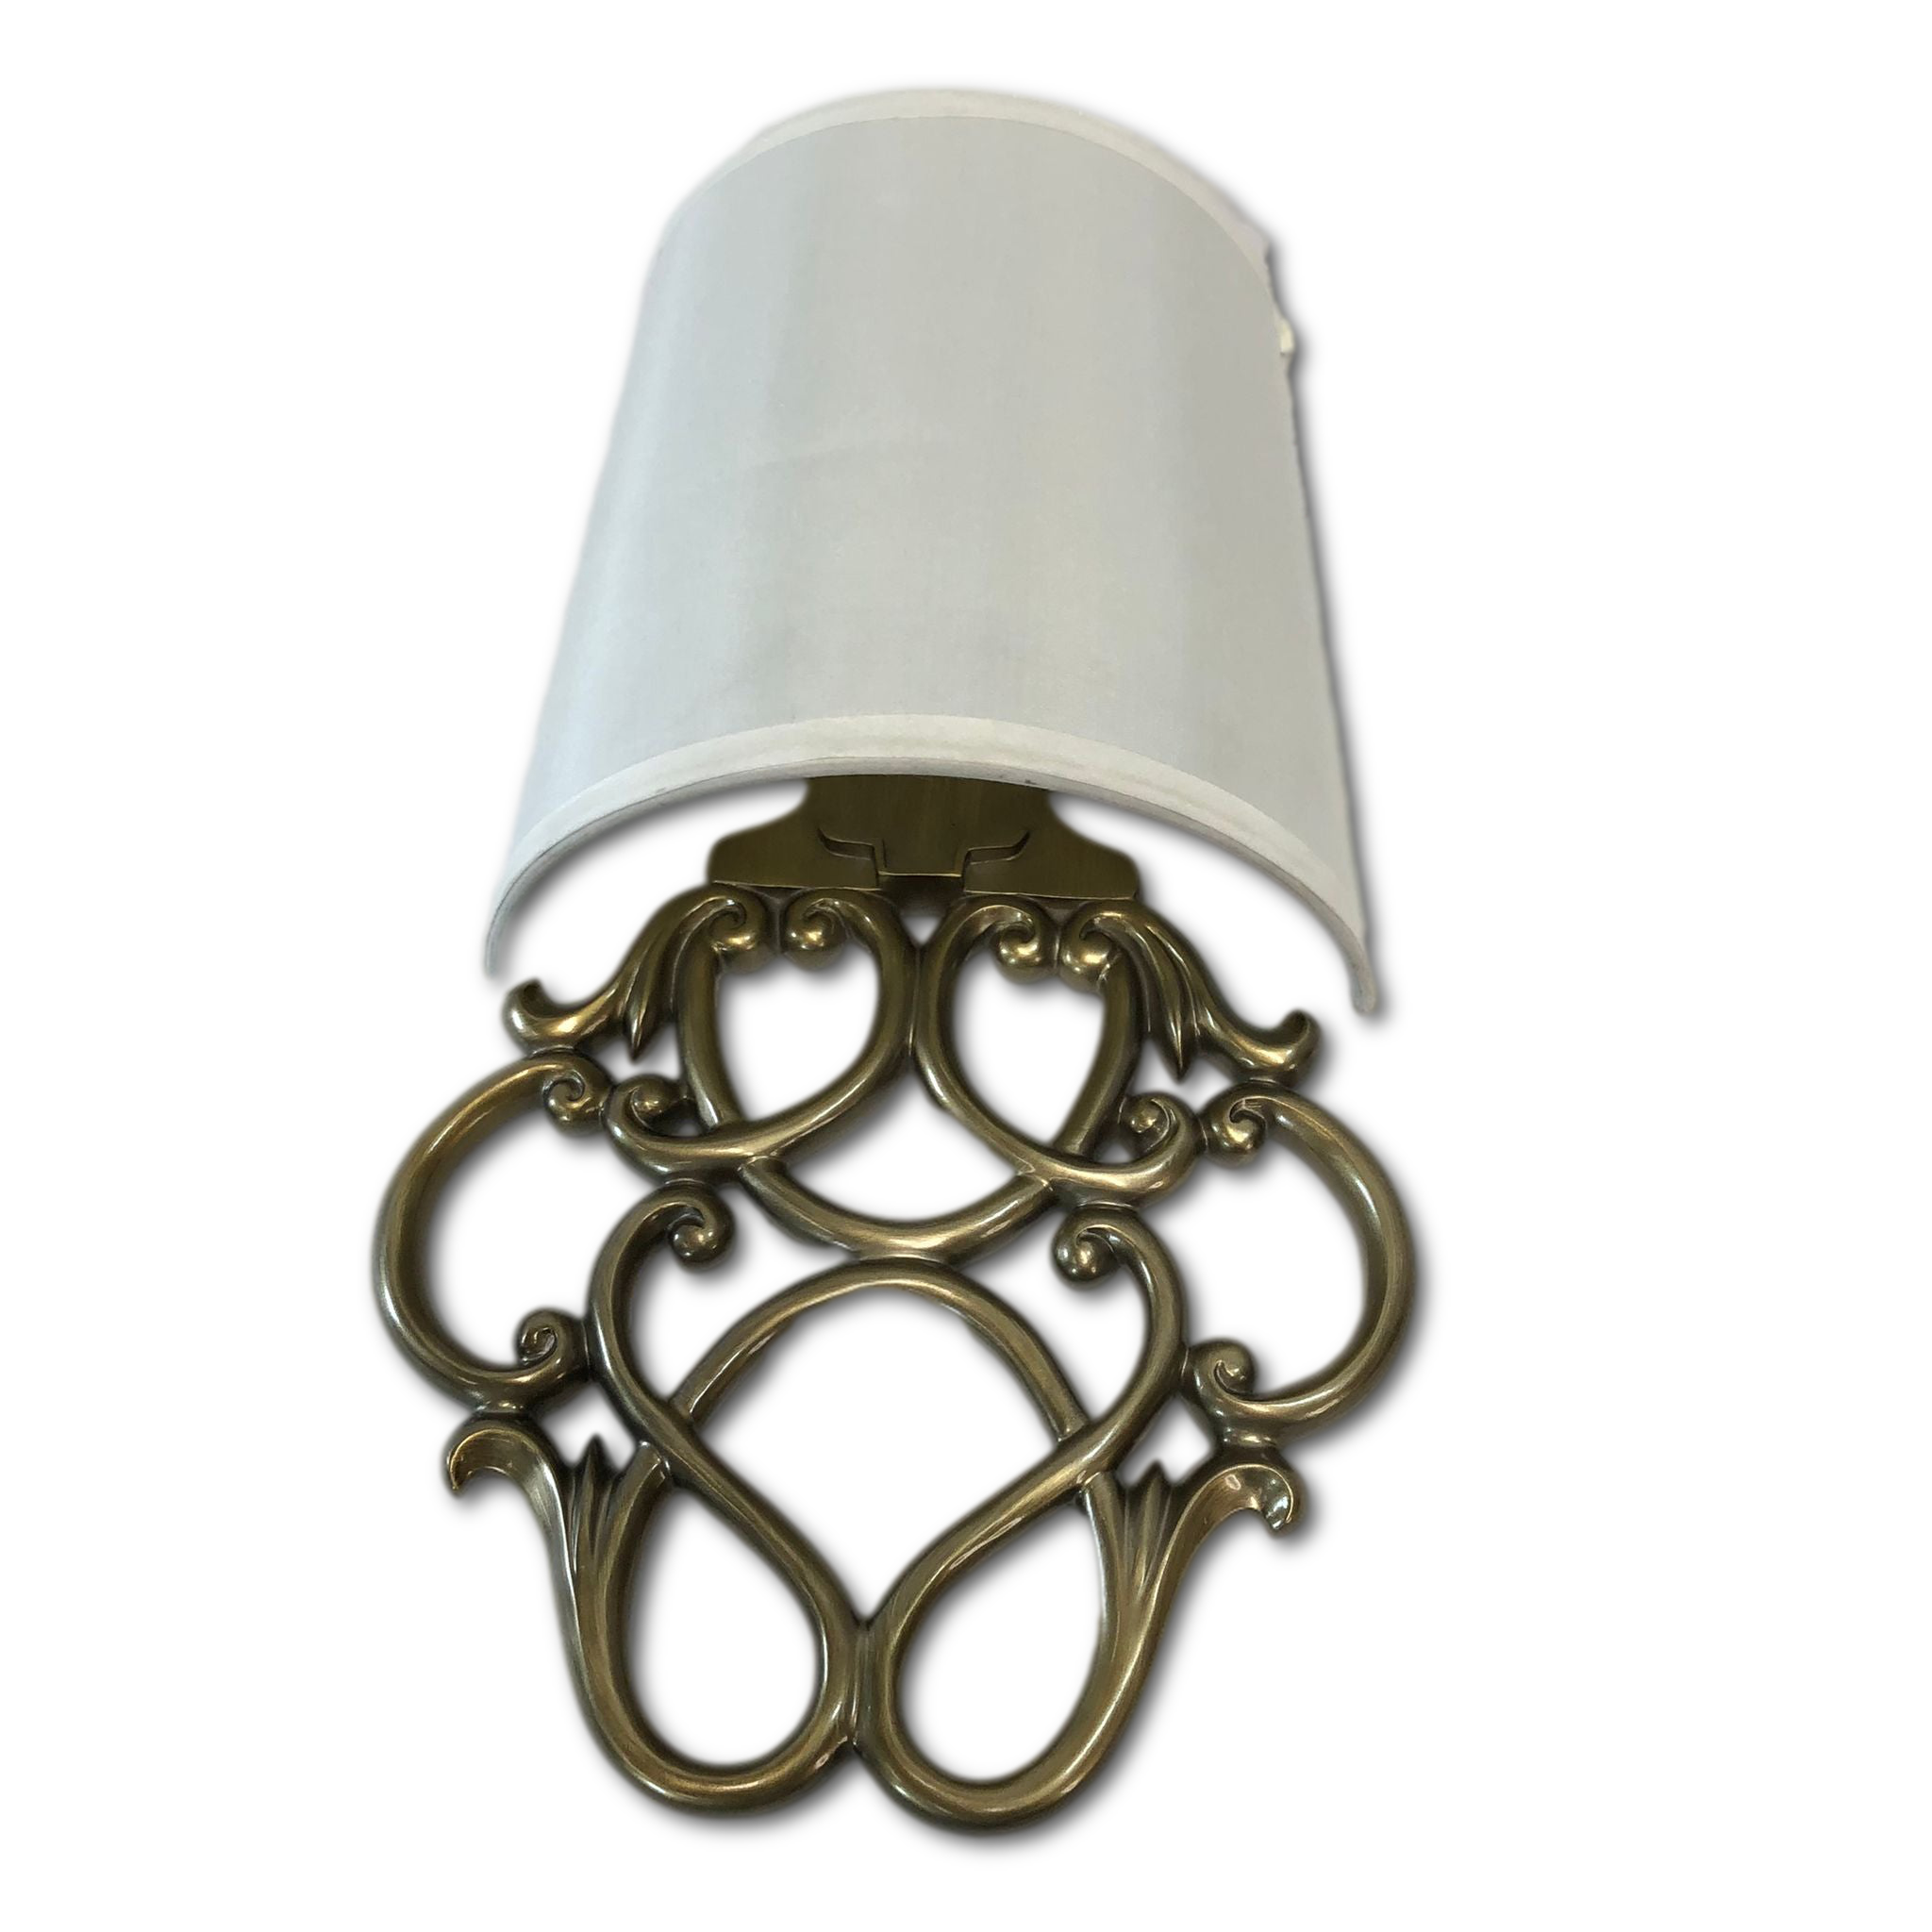 It's Exciting Lighting Battery-Powered Wall Sconce Set